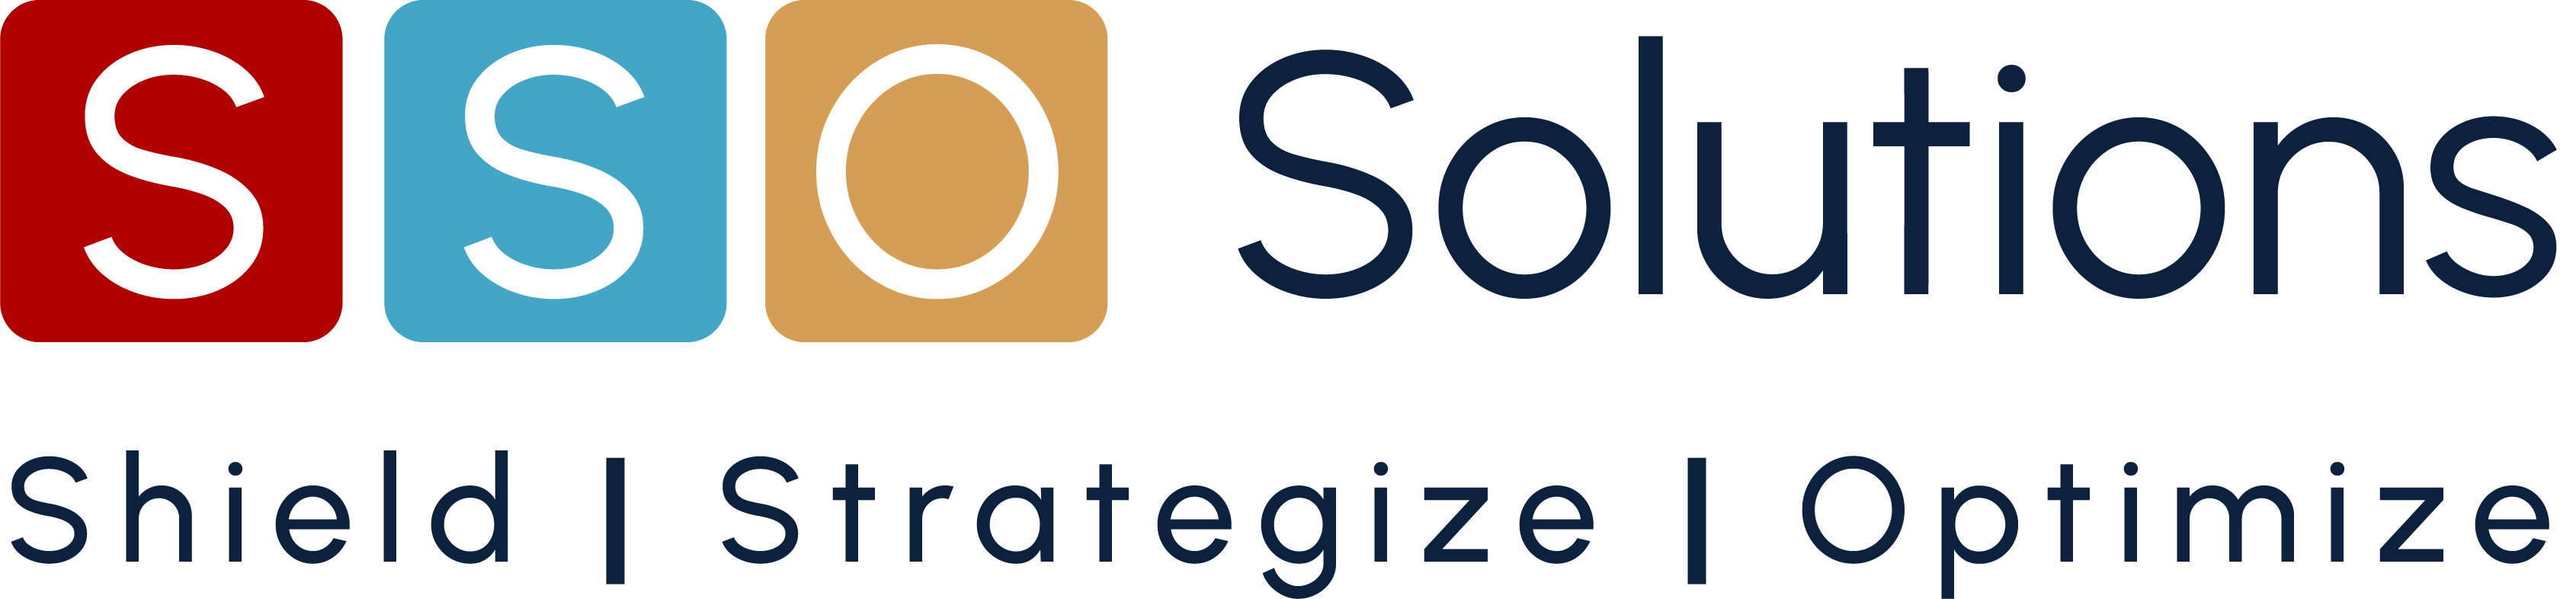 SSO Solutions